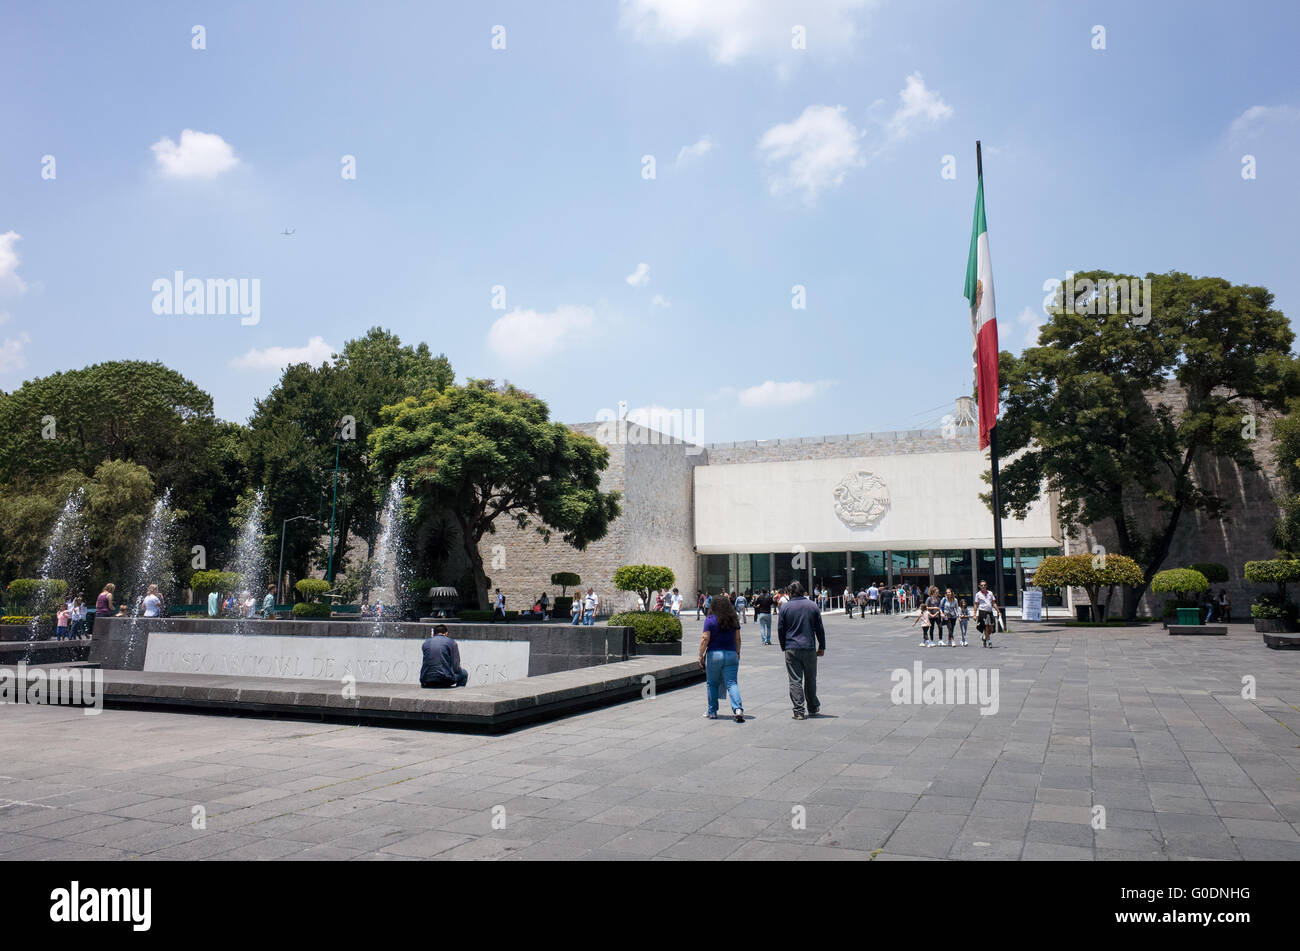 MEXICO CITY, MEXICO--The National Museum of Anthropology showcases  significant archaeological and anthropological artifacts from the Mexico's pre-Columbian heritage, including its Aztec and indiginous cultures. Stock Photo